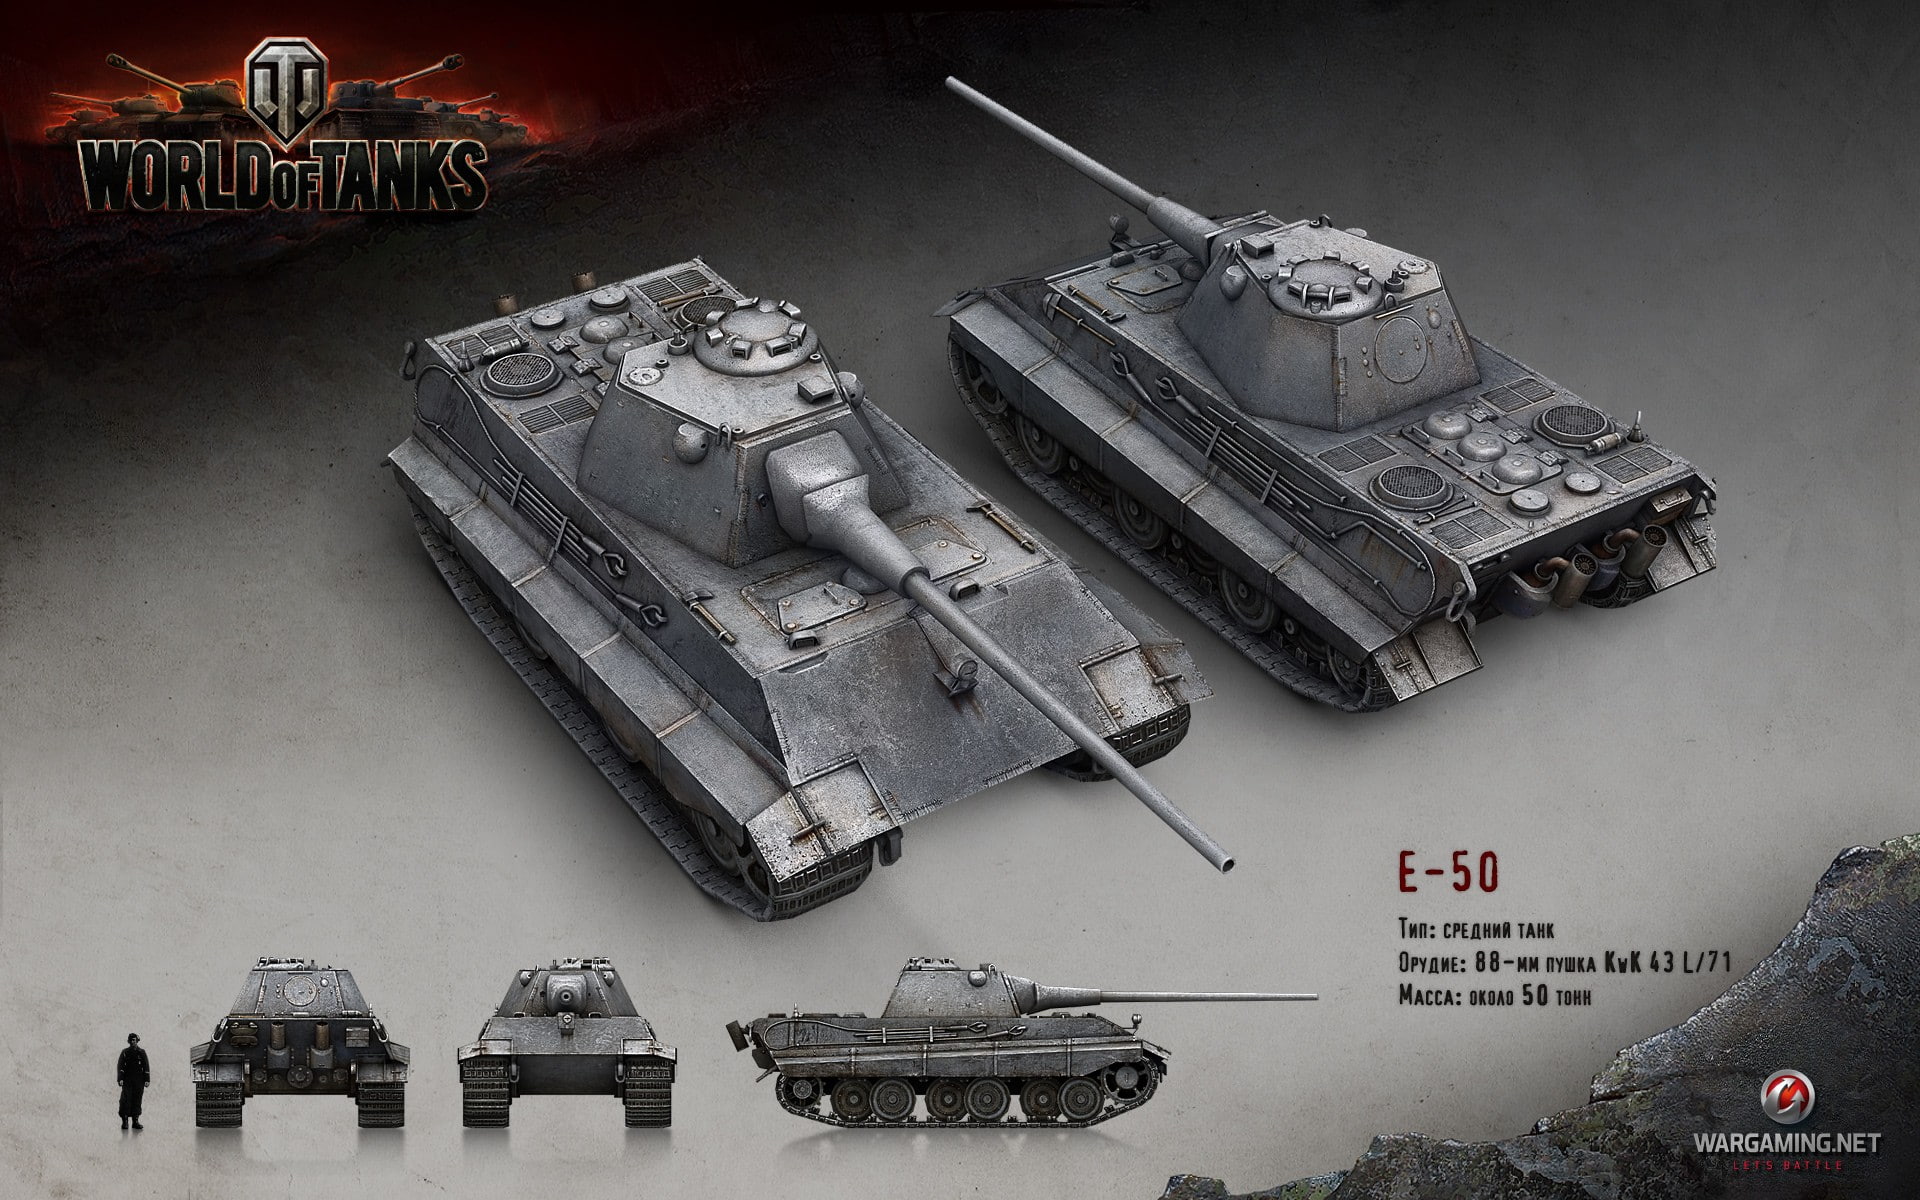 World of Tanks, wargaming, E-50, video games, high angle view